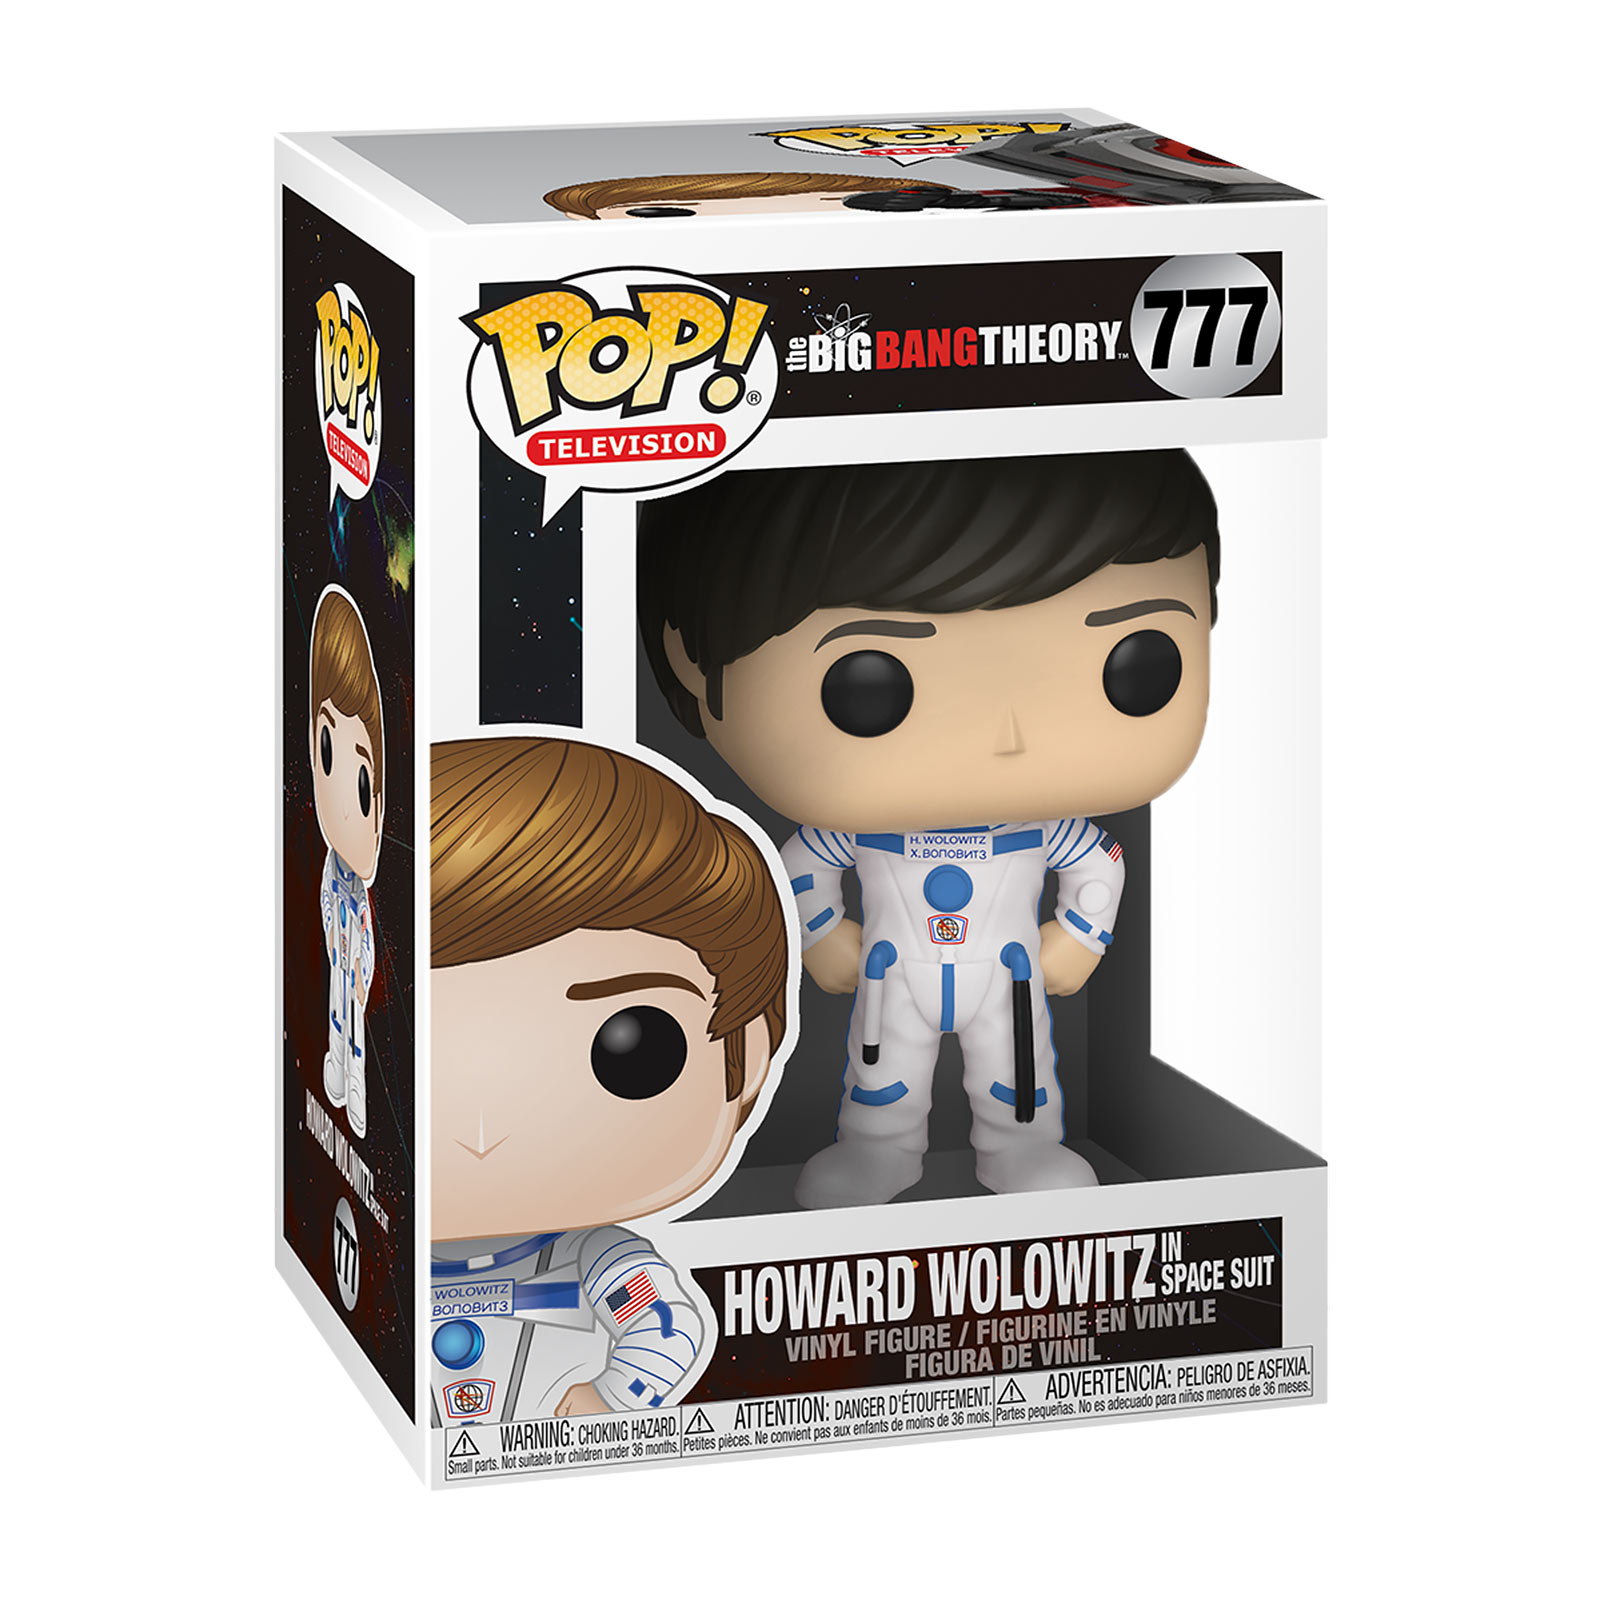 Big Bang Theory - Howard Wolowitz in space suit Funko Pop figure